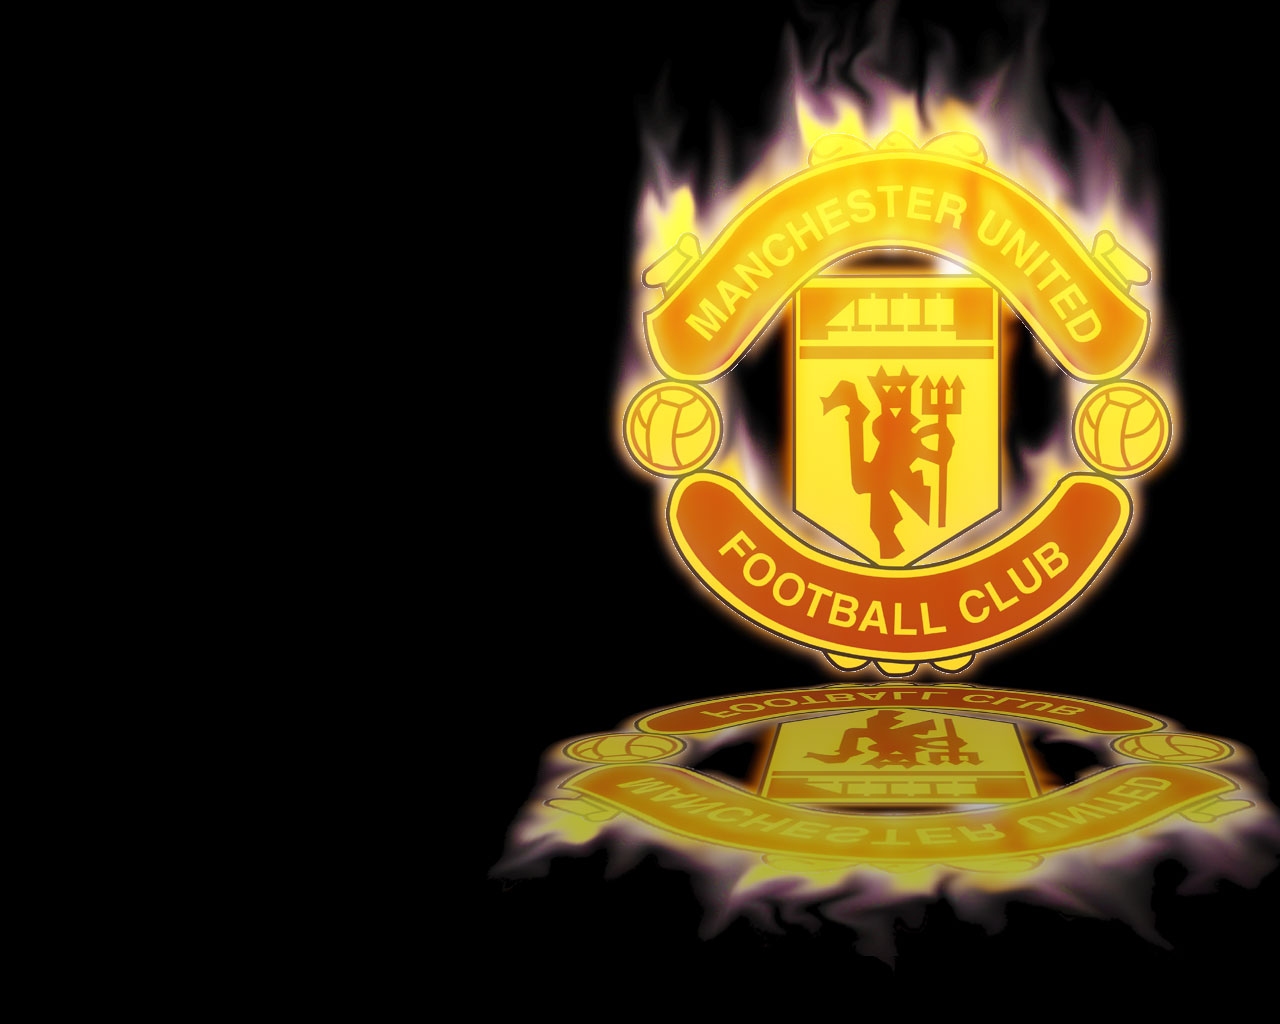 Man Utd Wallpaper 2011 · Become ONE UNITED Fans On FACEBOOK Pages